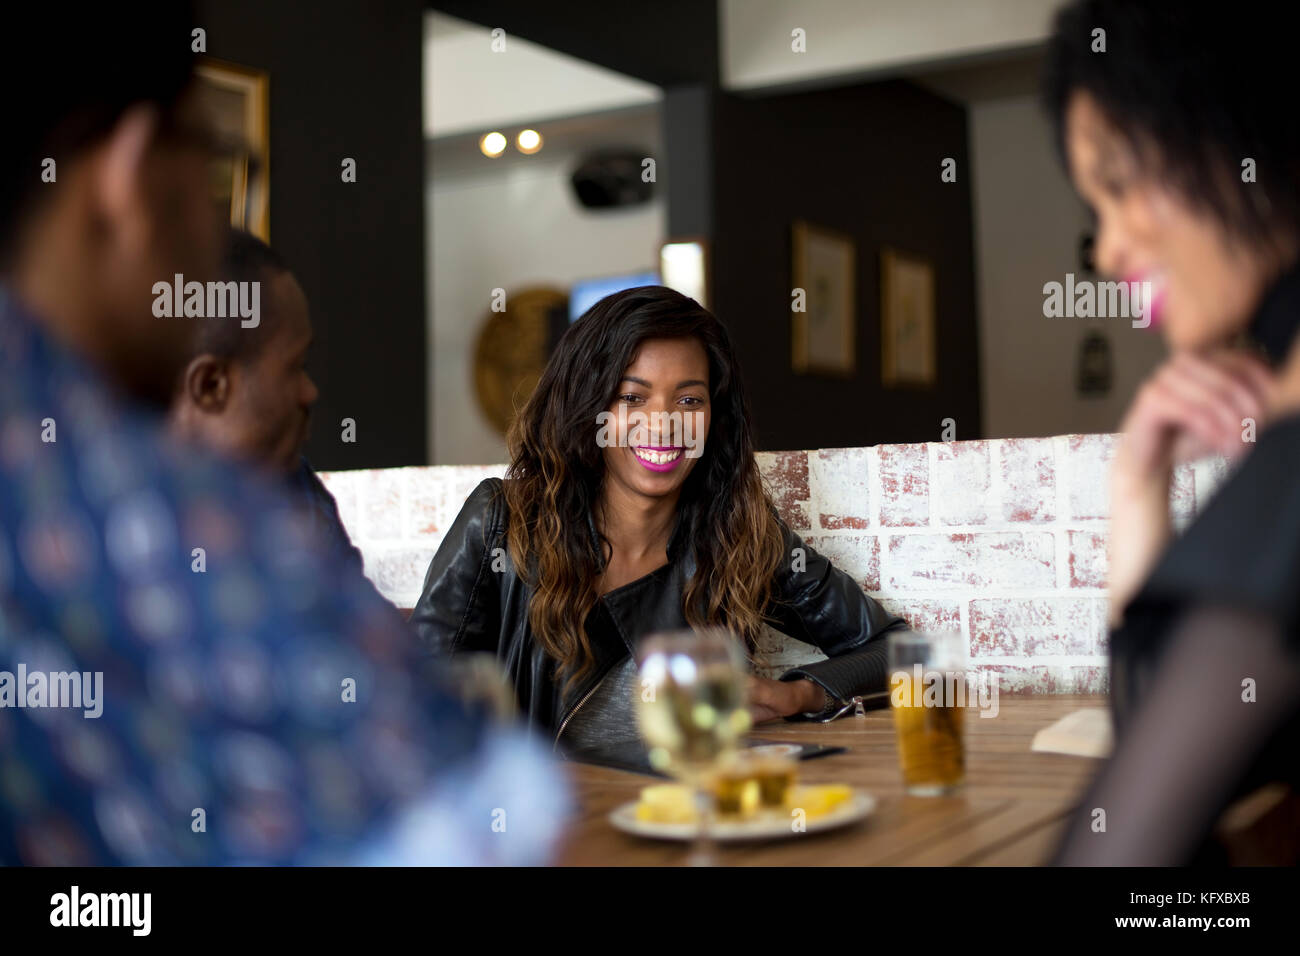 Woman smiling at restaurant Stock Photo